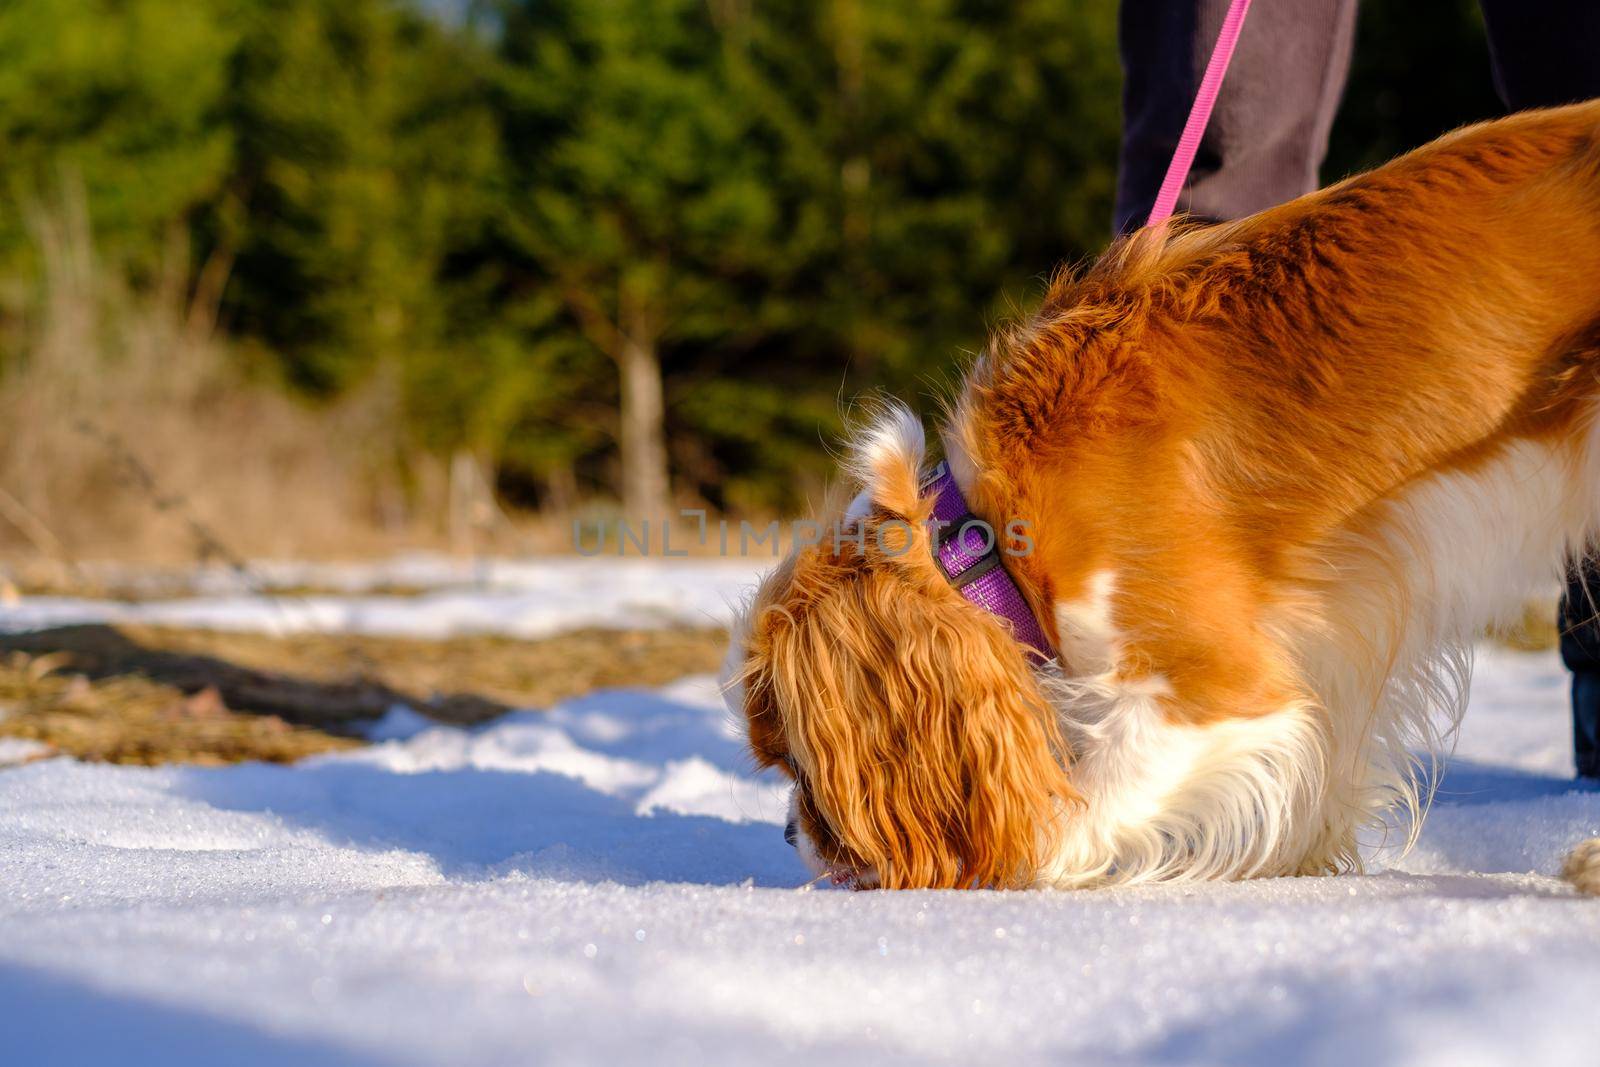 A Cavalier King Charles Spaniel out for a walk sniffs a large patch of snow on the ground. The pet dog wears a purple collar over her Blenheim coloring.